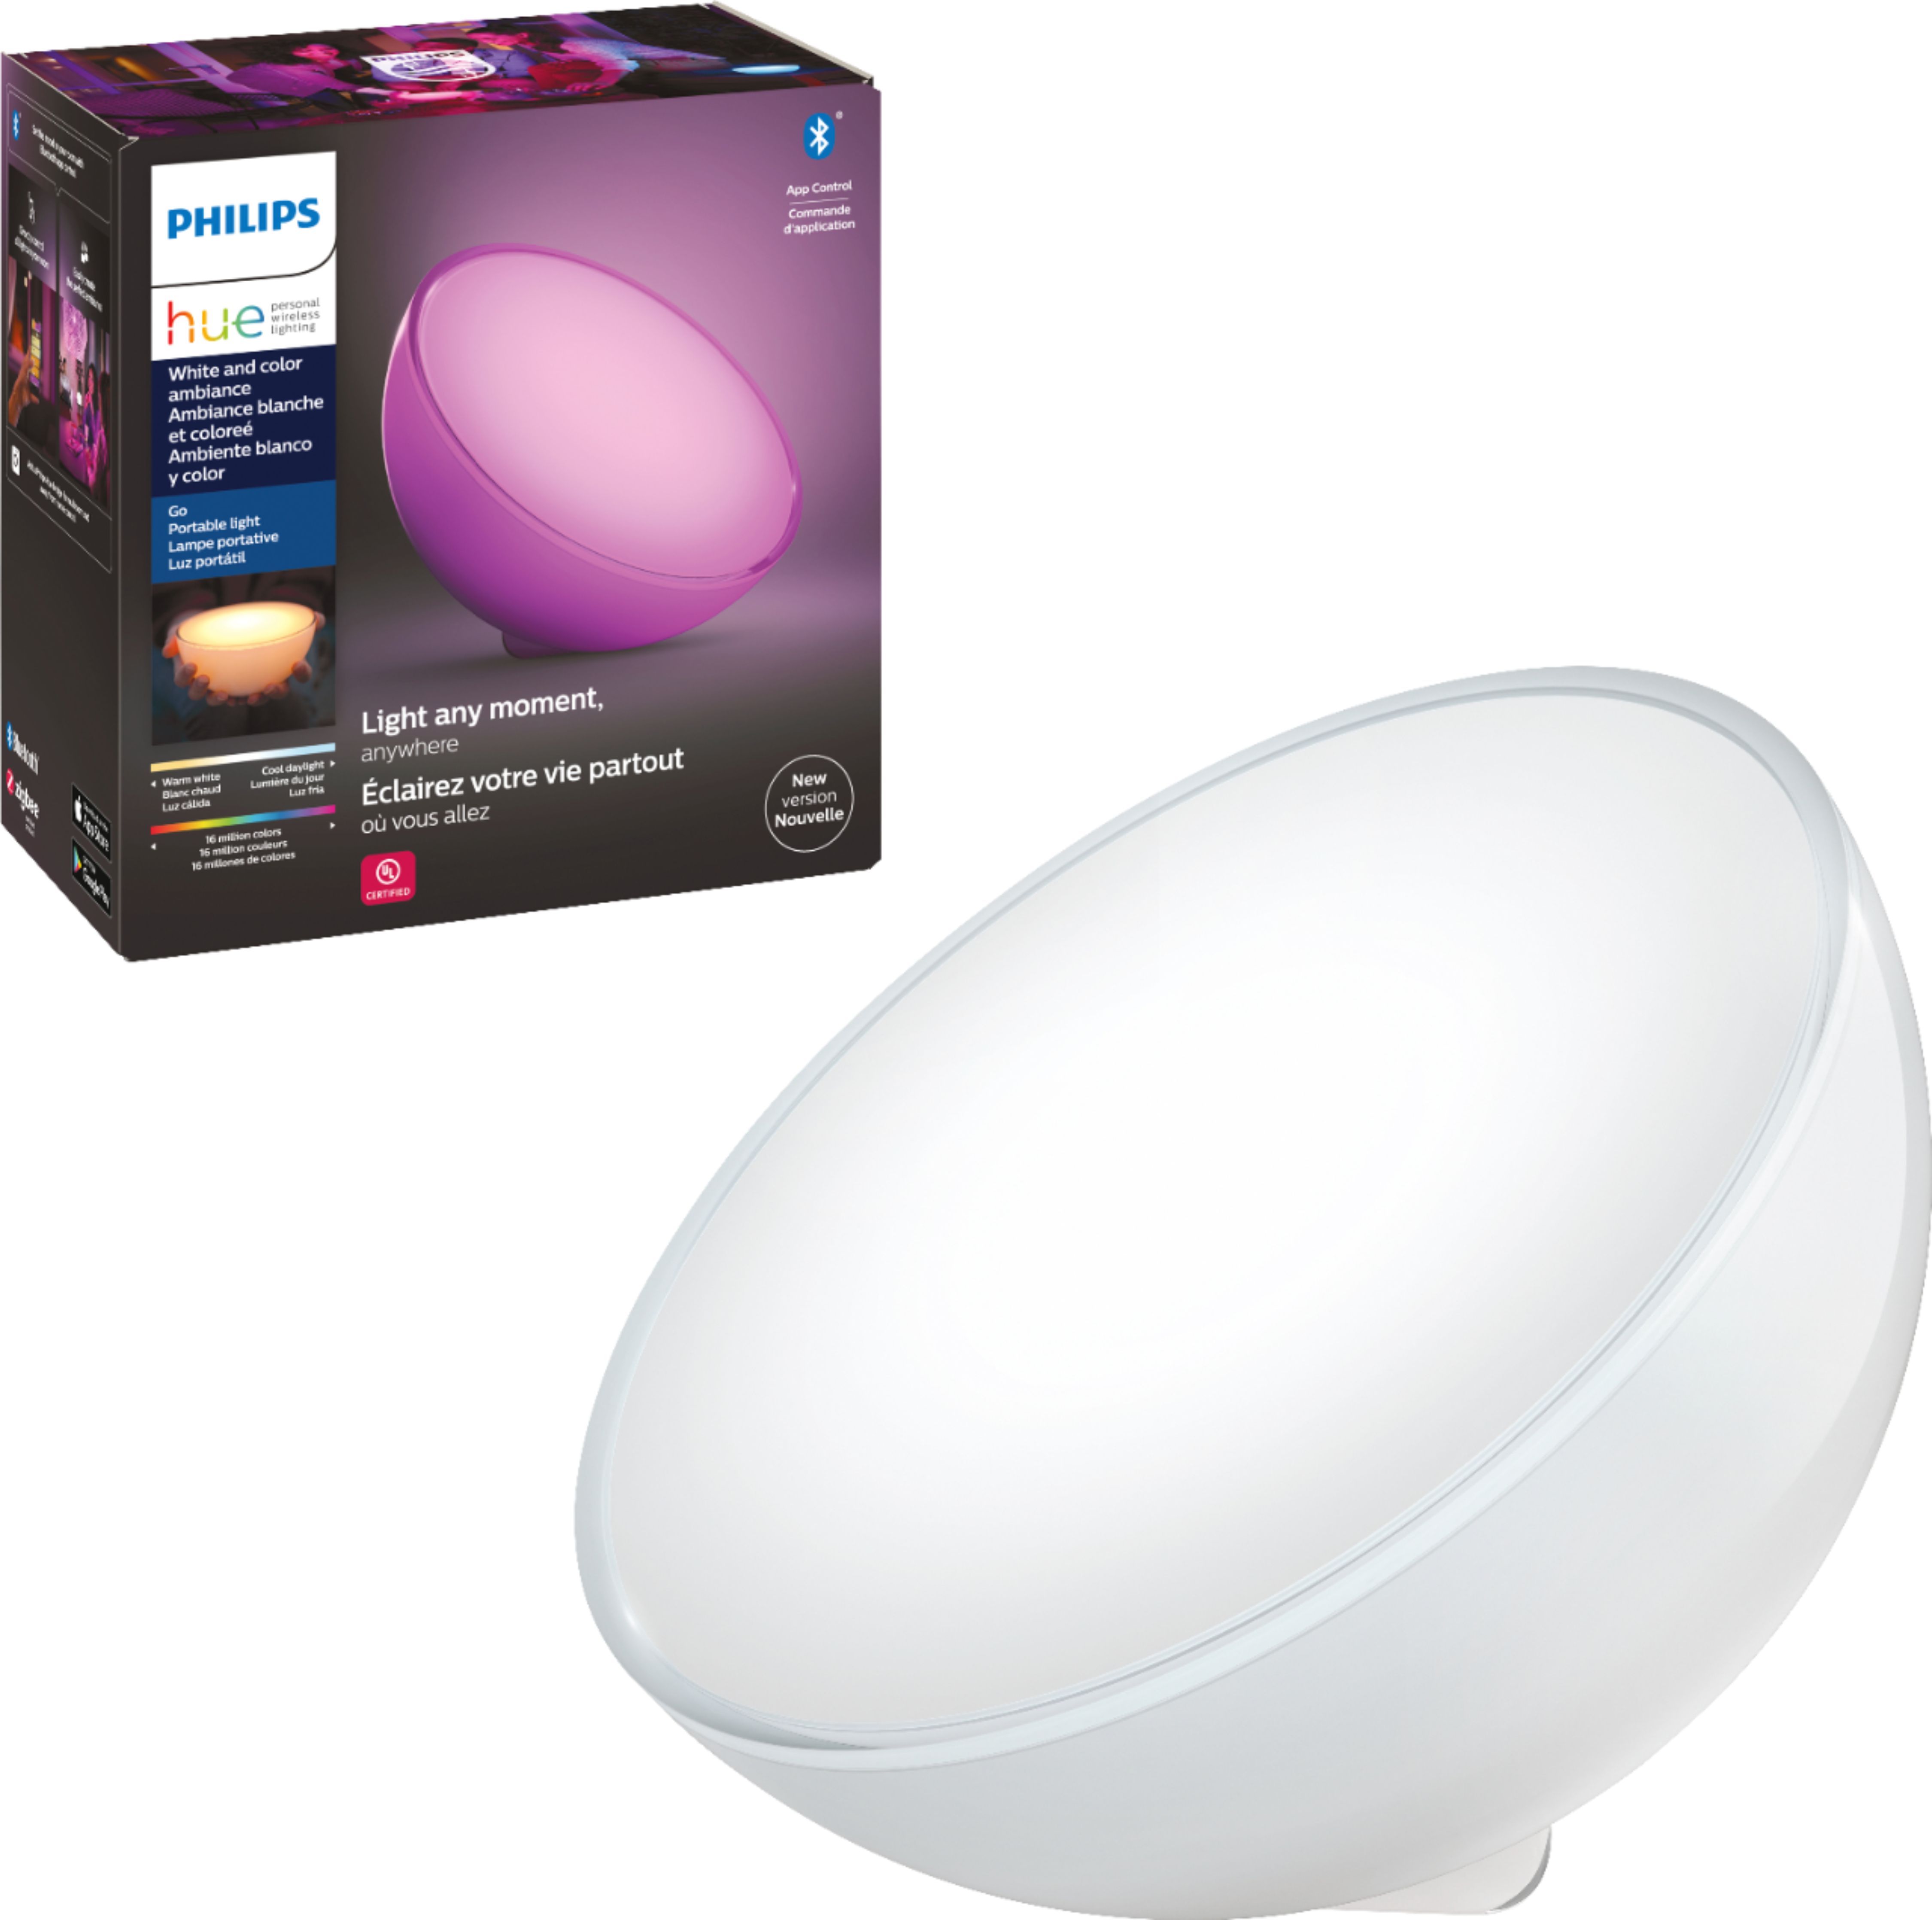 Philips Hue & Color Ambiance Go Table Lamp White 7602031 - Best Buy | Best Buy U.S.